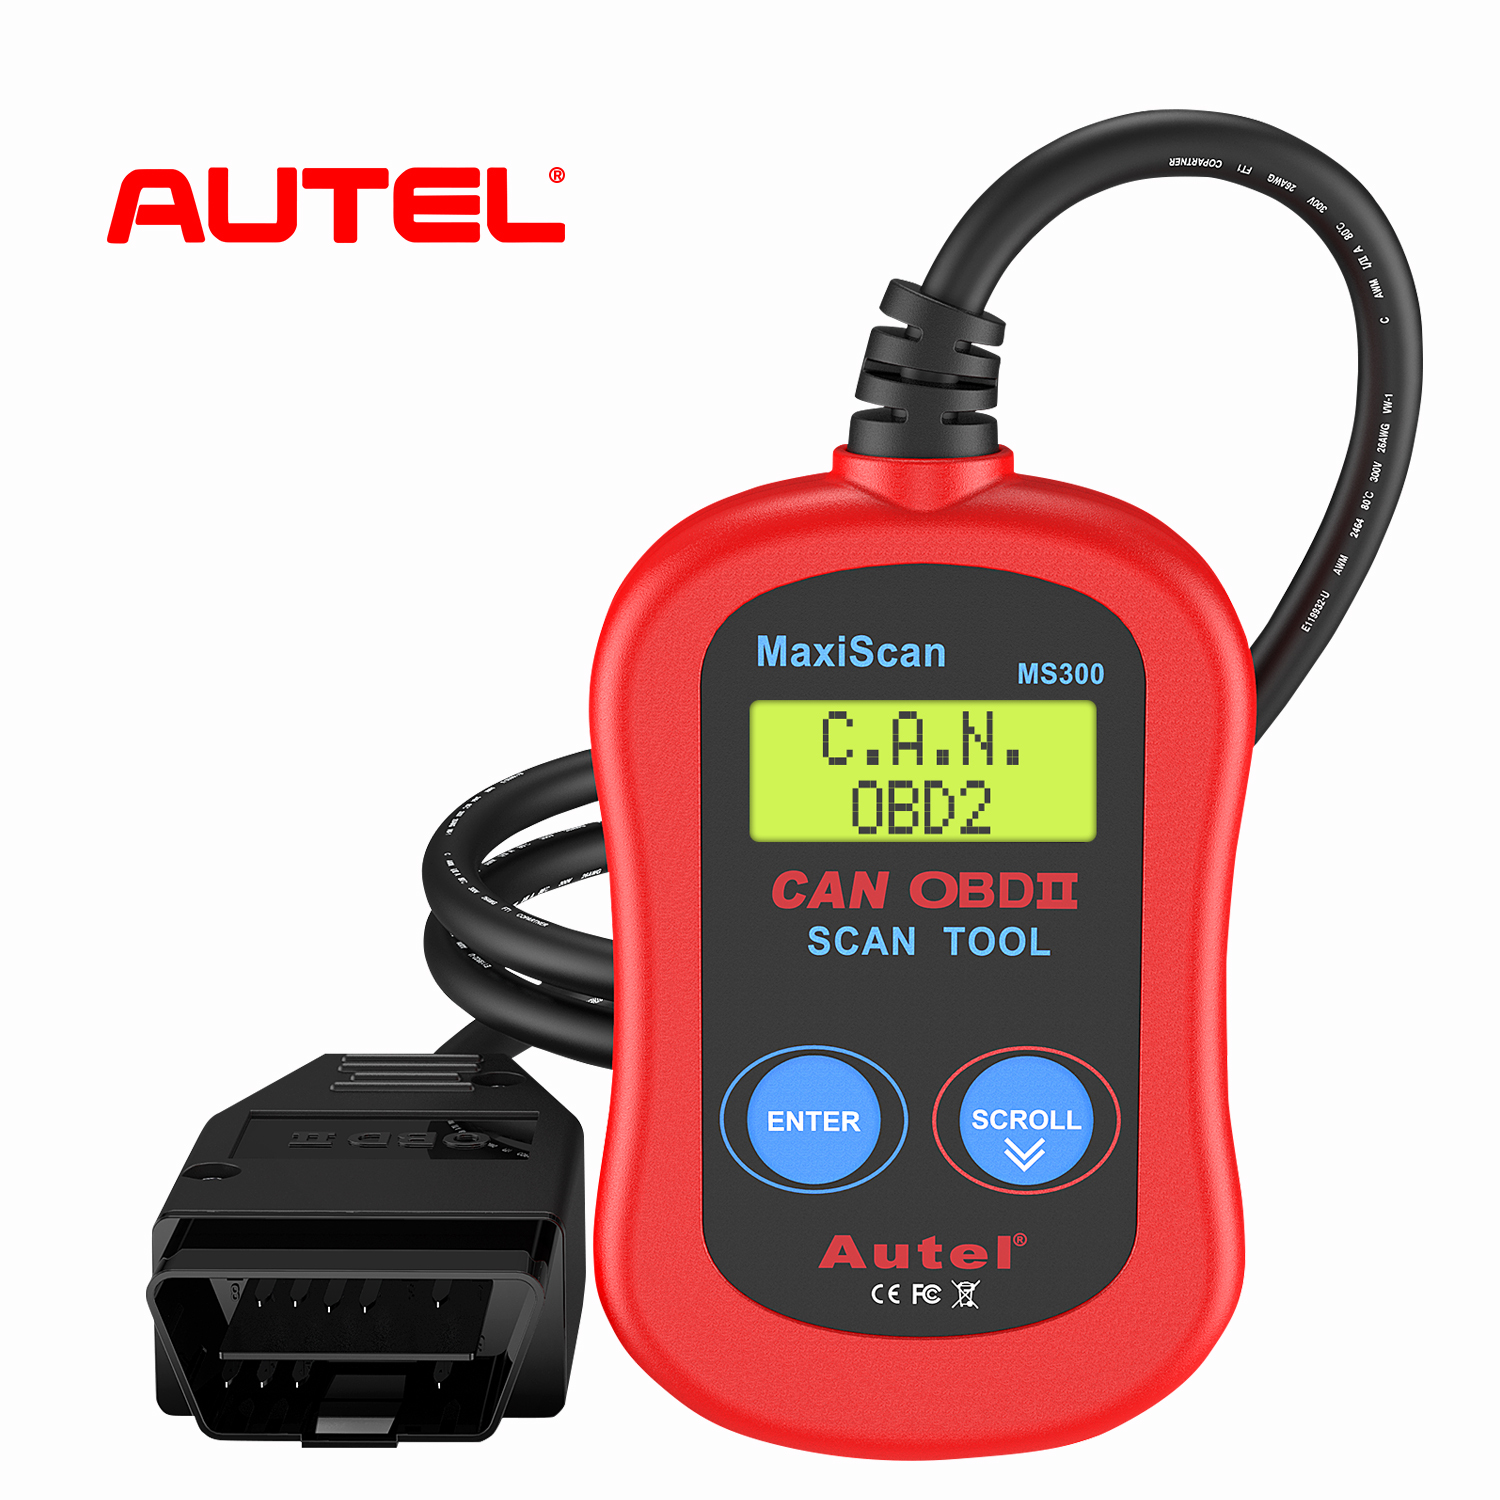 Autel MS300 Universal OBD2 Scanner Car Code Reader, Read  Erase Fault Codes,  Check Emission Monitor Status CAN Vehicles Diagnostic Scan Tool 